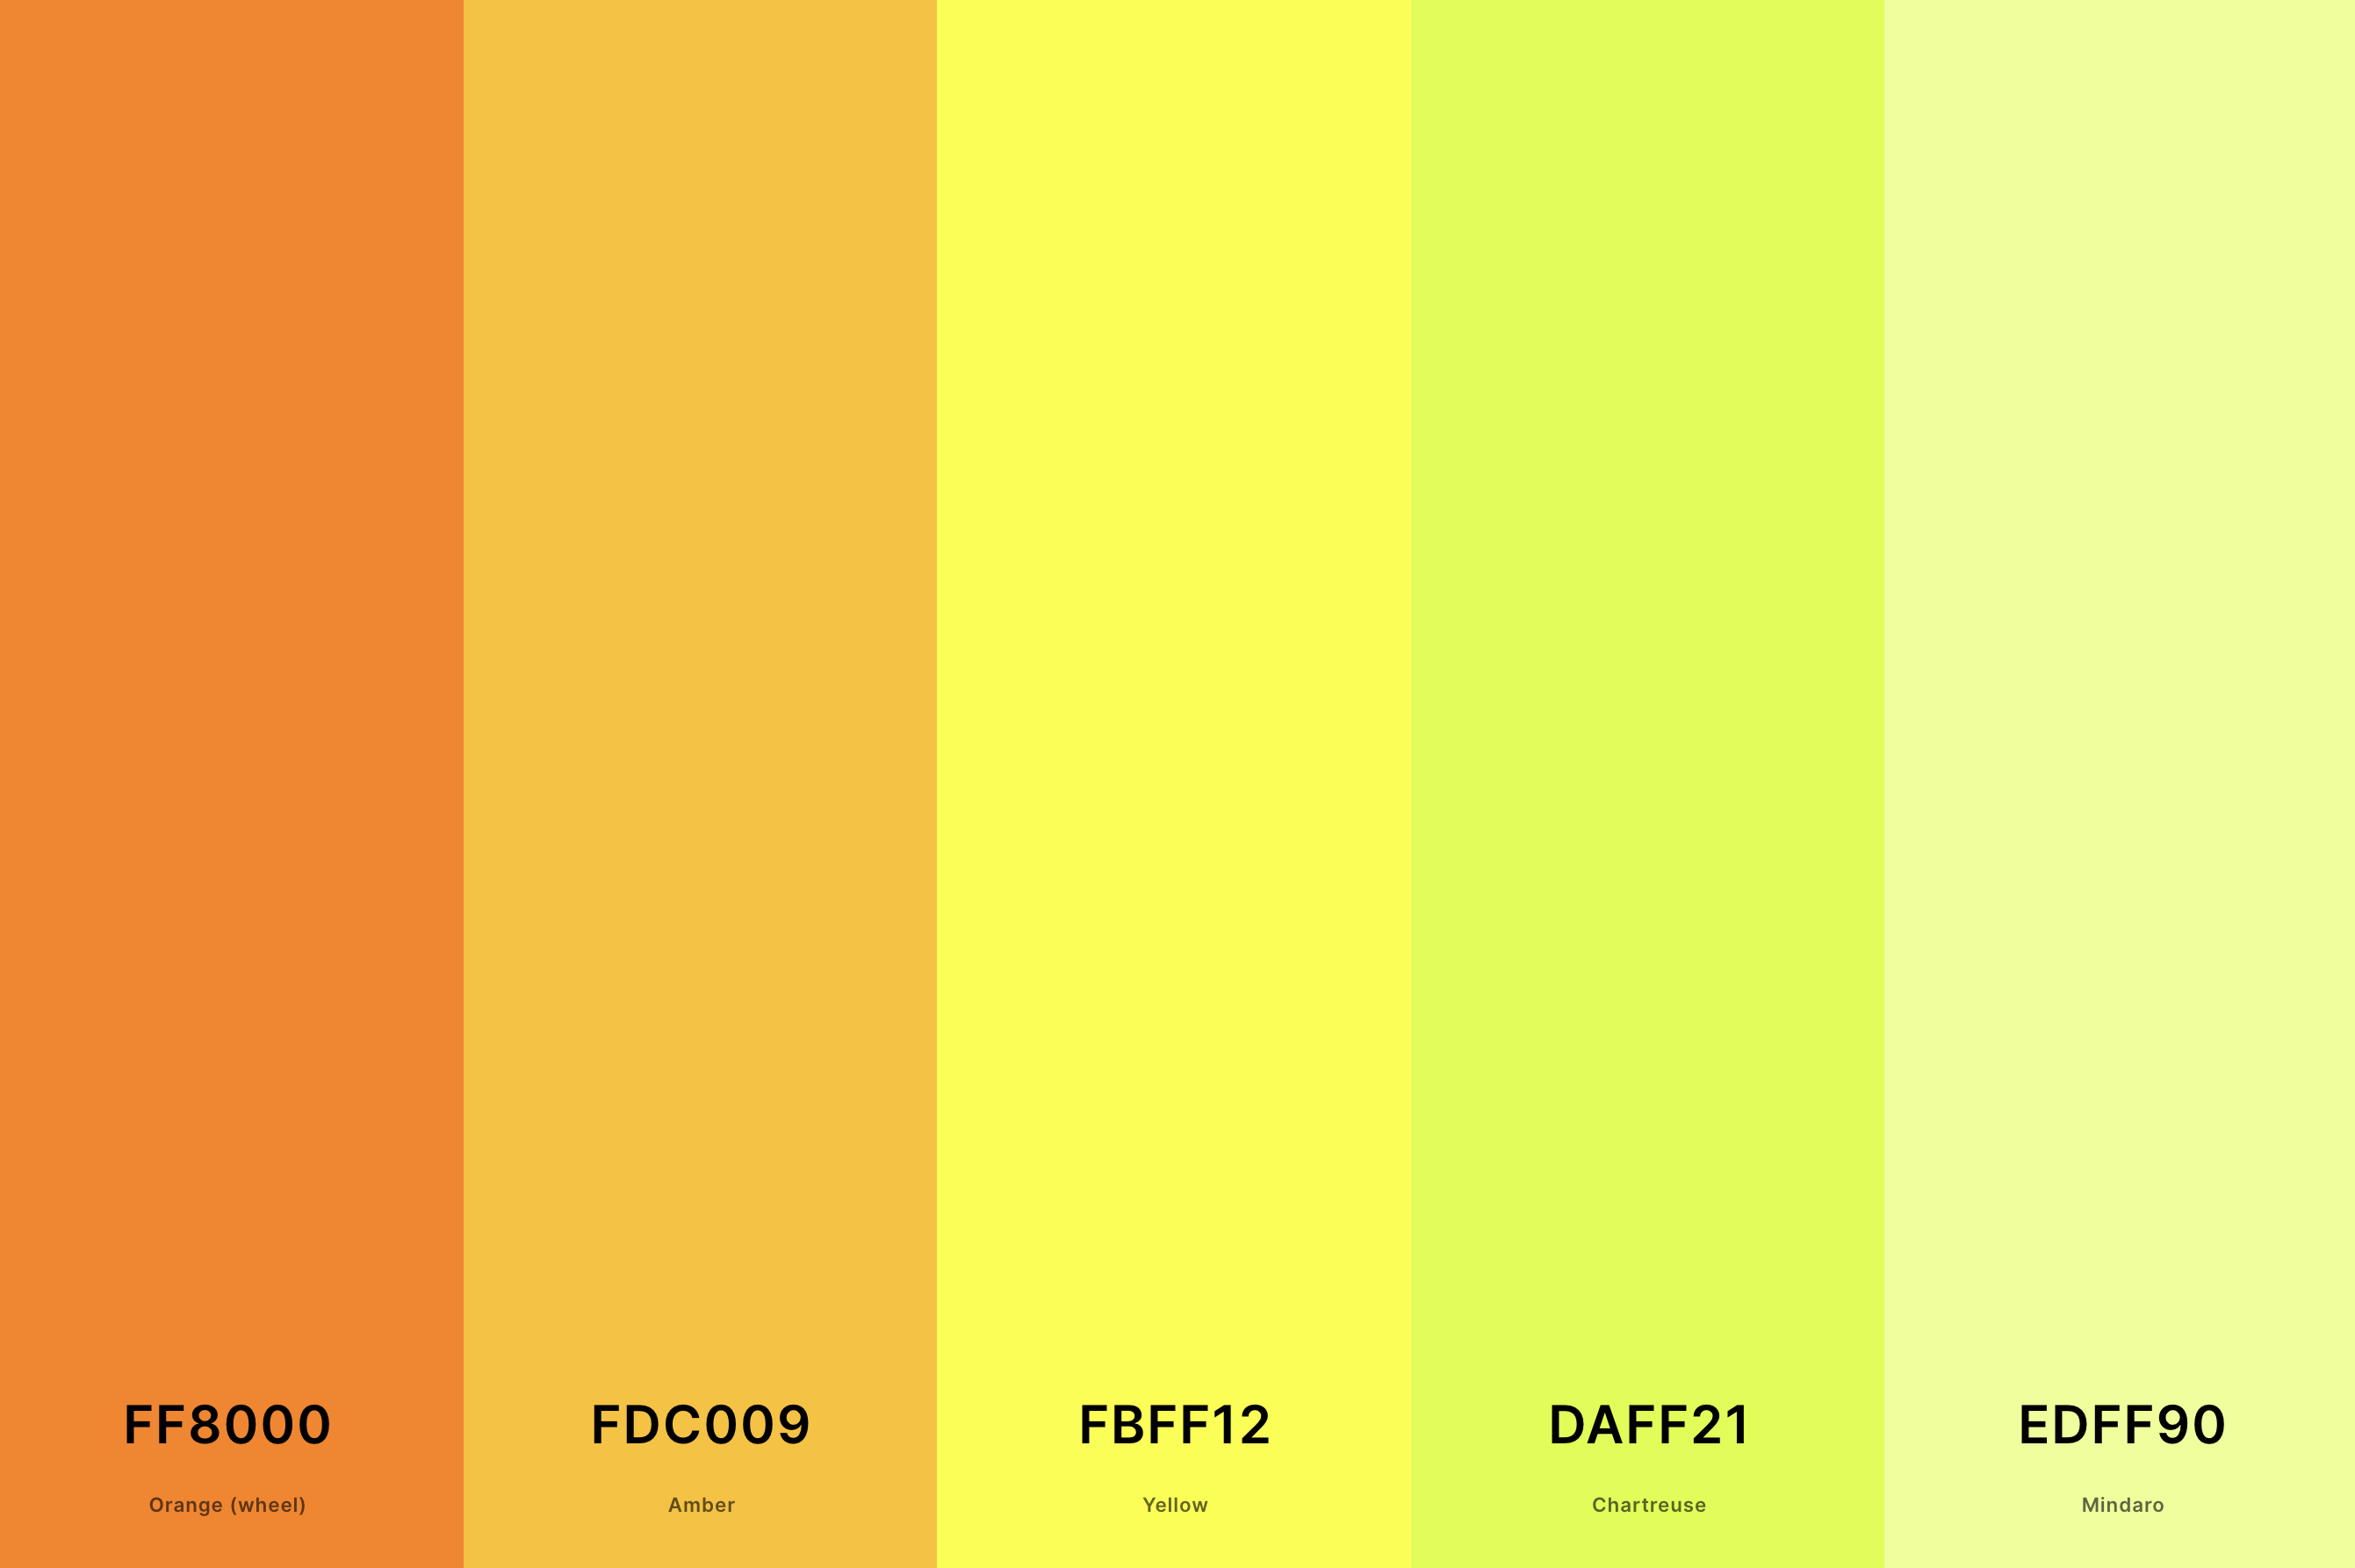 8. Neon Yellow Color Palette Color Palette with Orange (Wheel) (Hex #FF8000) + Amber (Hex #FDC009) + Yellow (Hex #FBFF12) + Chartreuse (Hex #DAFF21) + Mindaro (Hex #EDFF90) Color Palette with Hex Codes